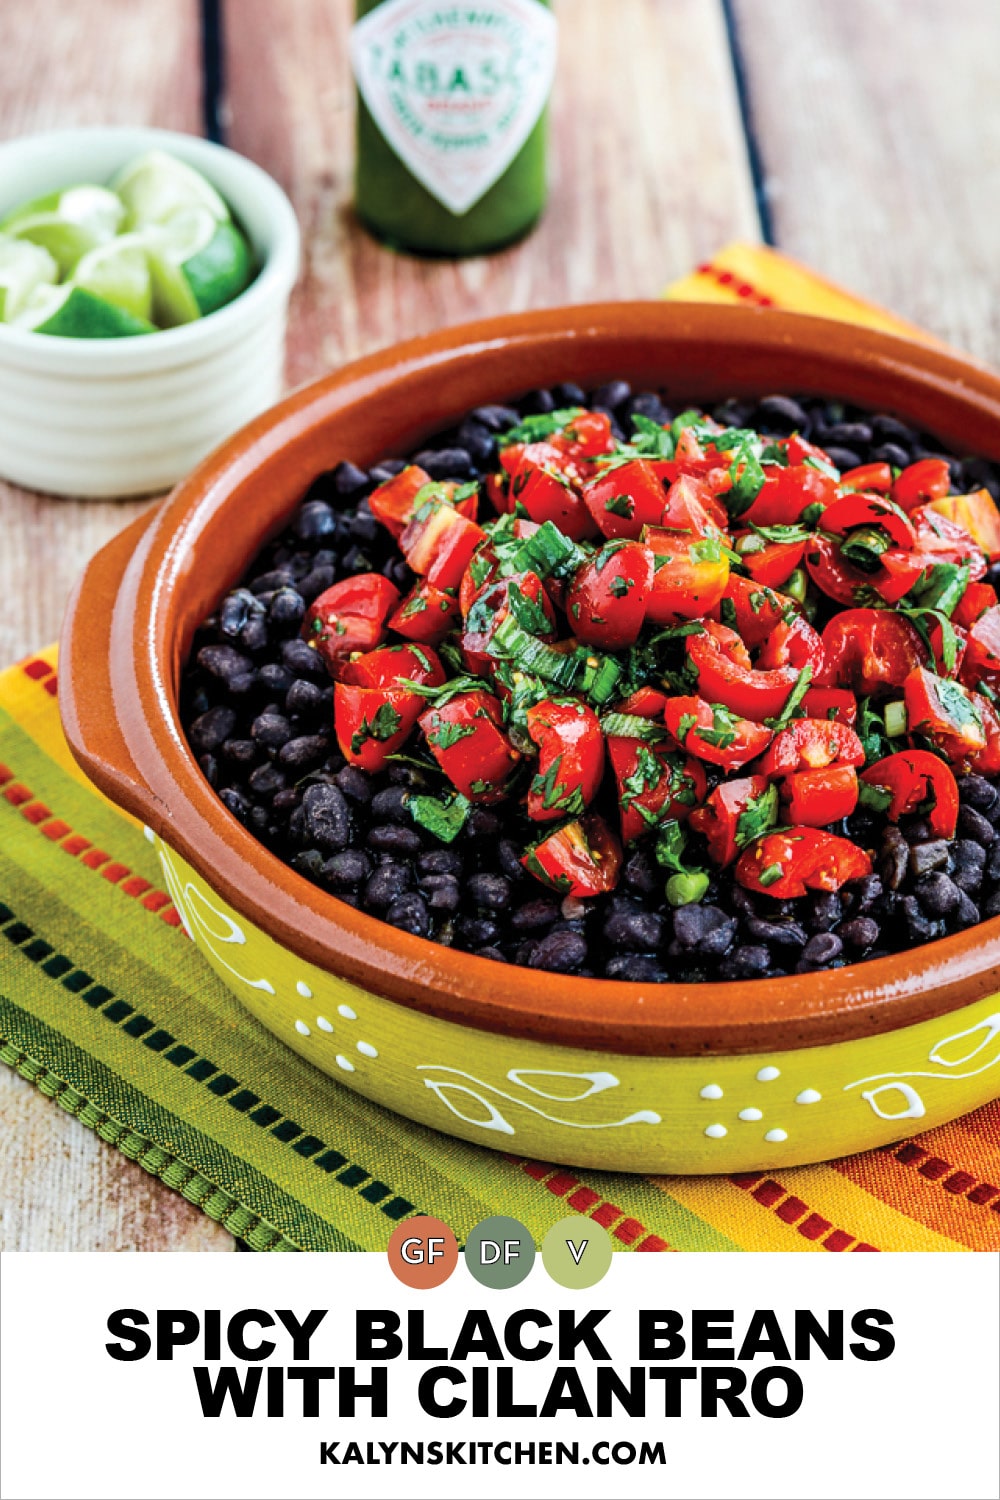 Pinterest image of Spicy Black Beans with Cilantro